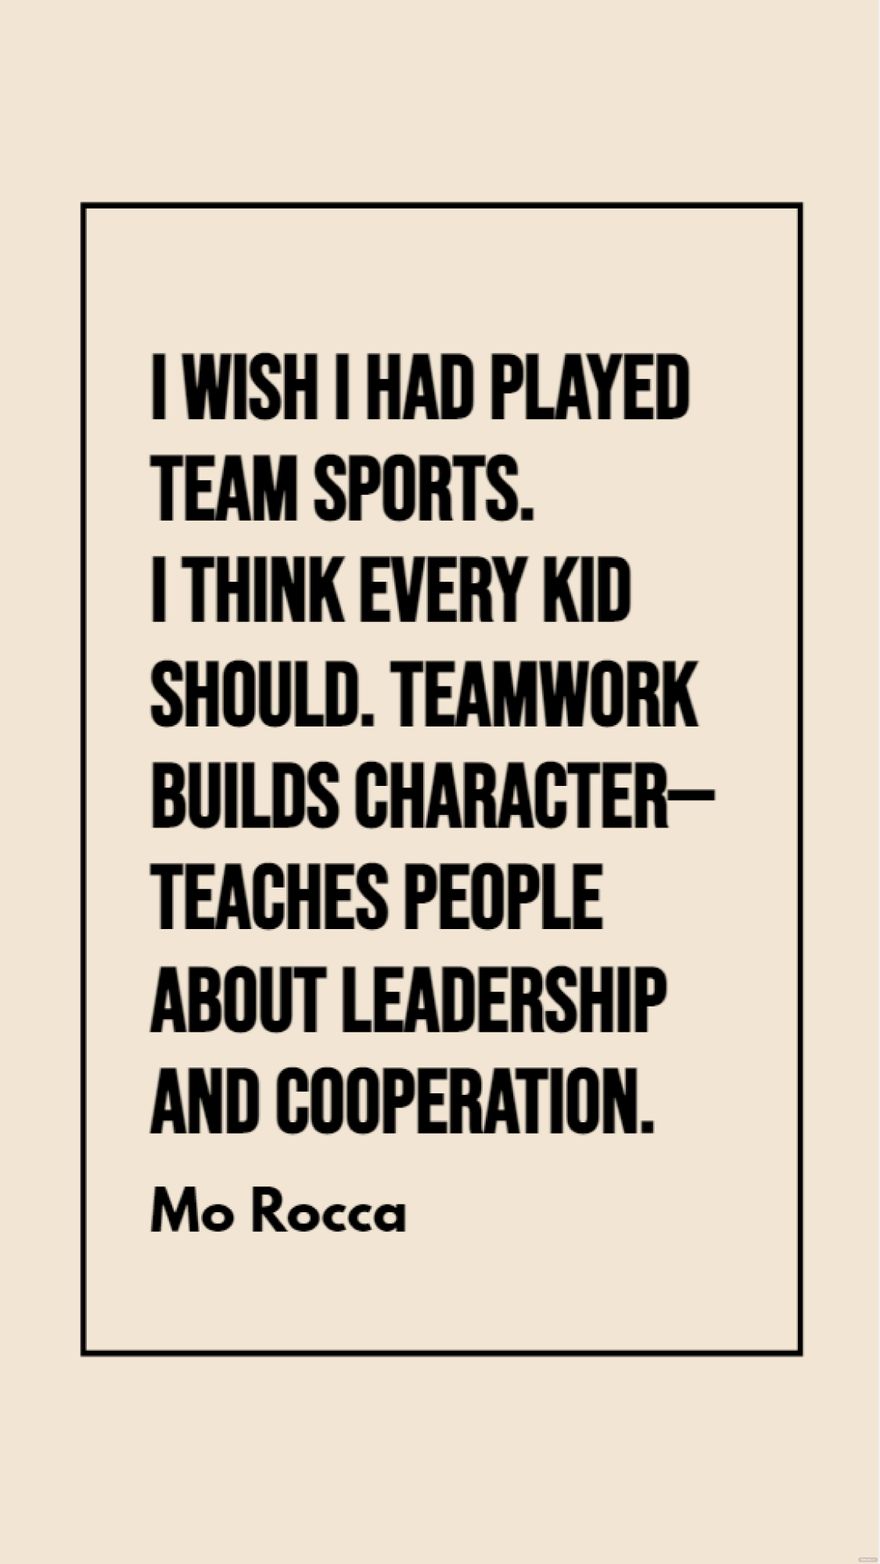 Free Mo Rocca - I wish I had played team sports. I think every kid should. Teamwork builds character - teaches people about leadership and cooperation.